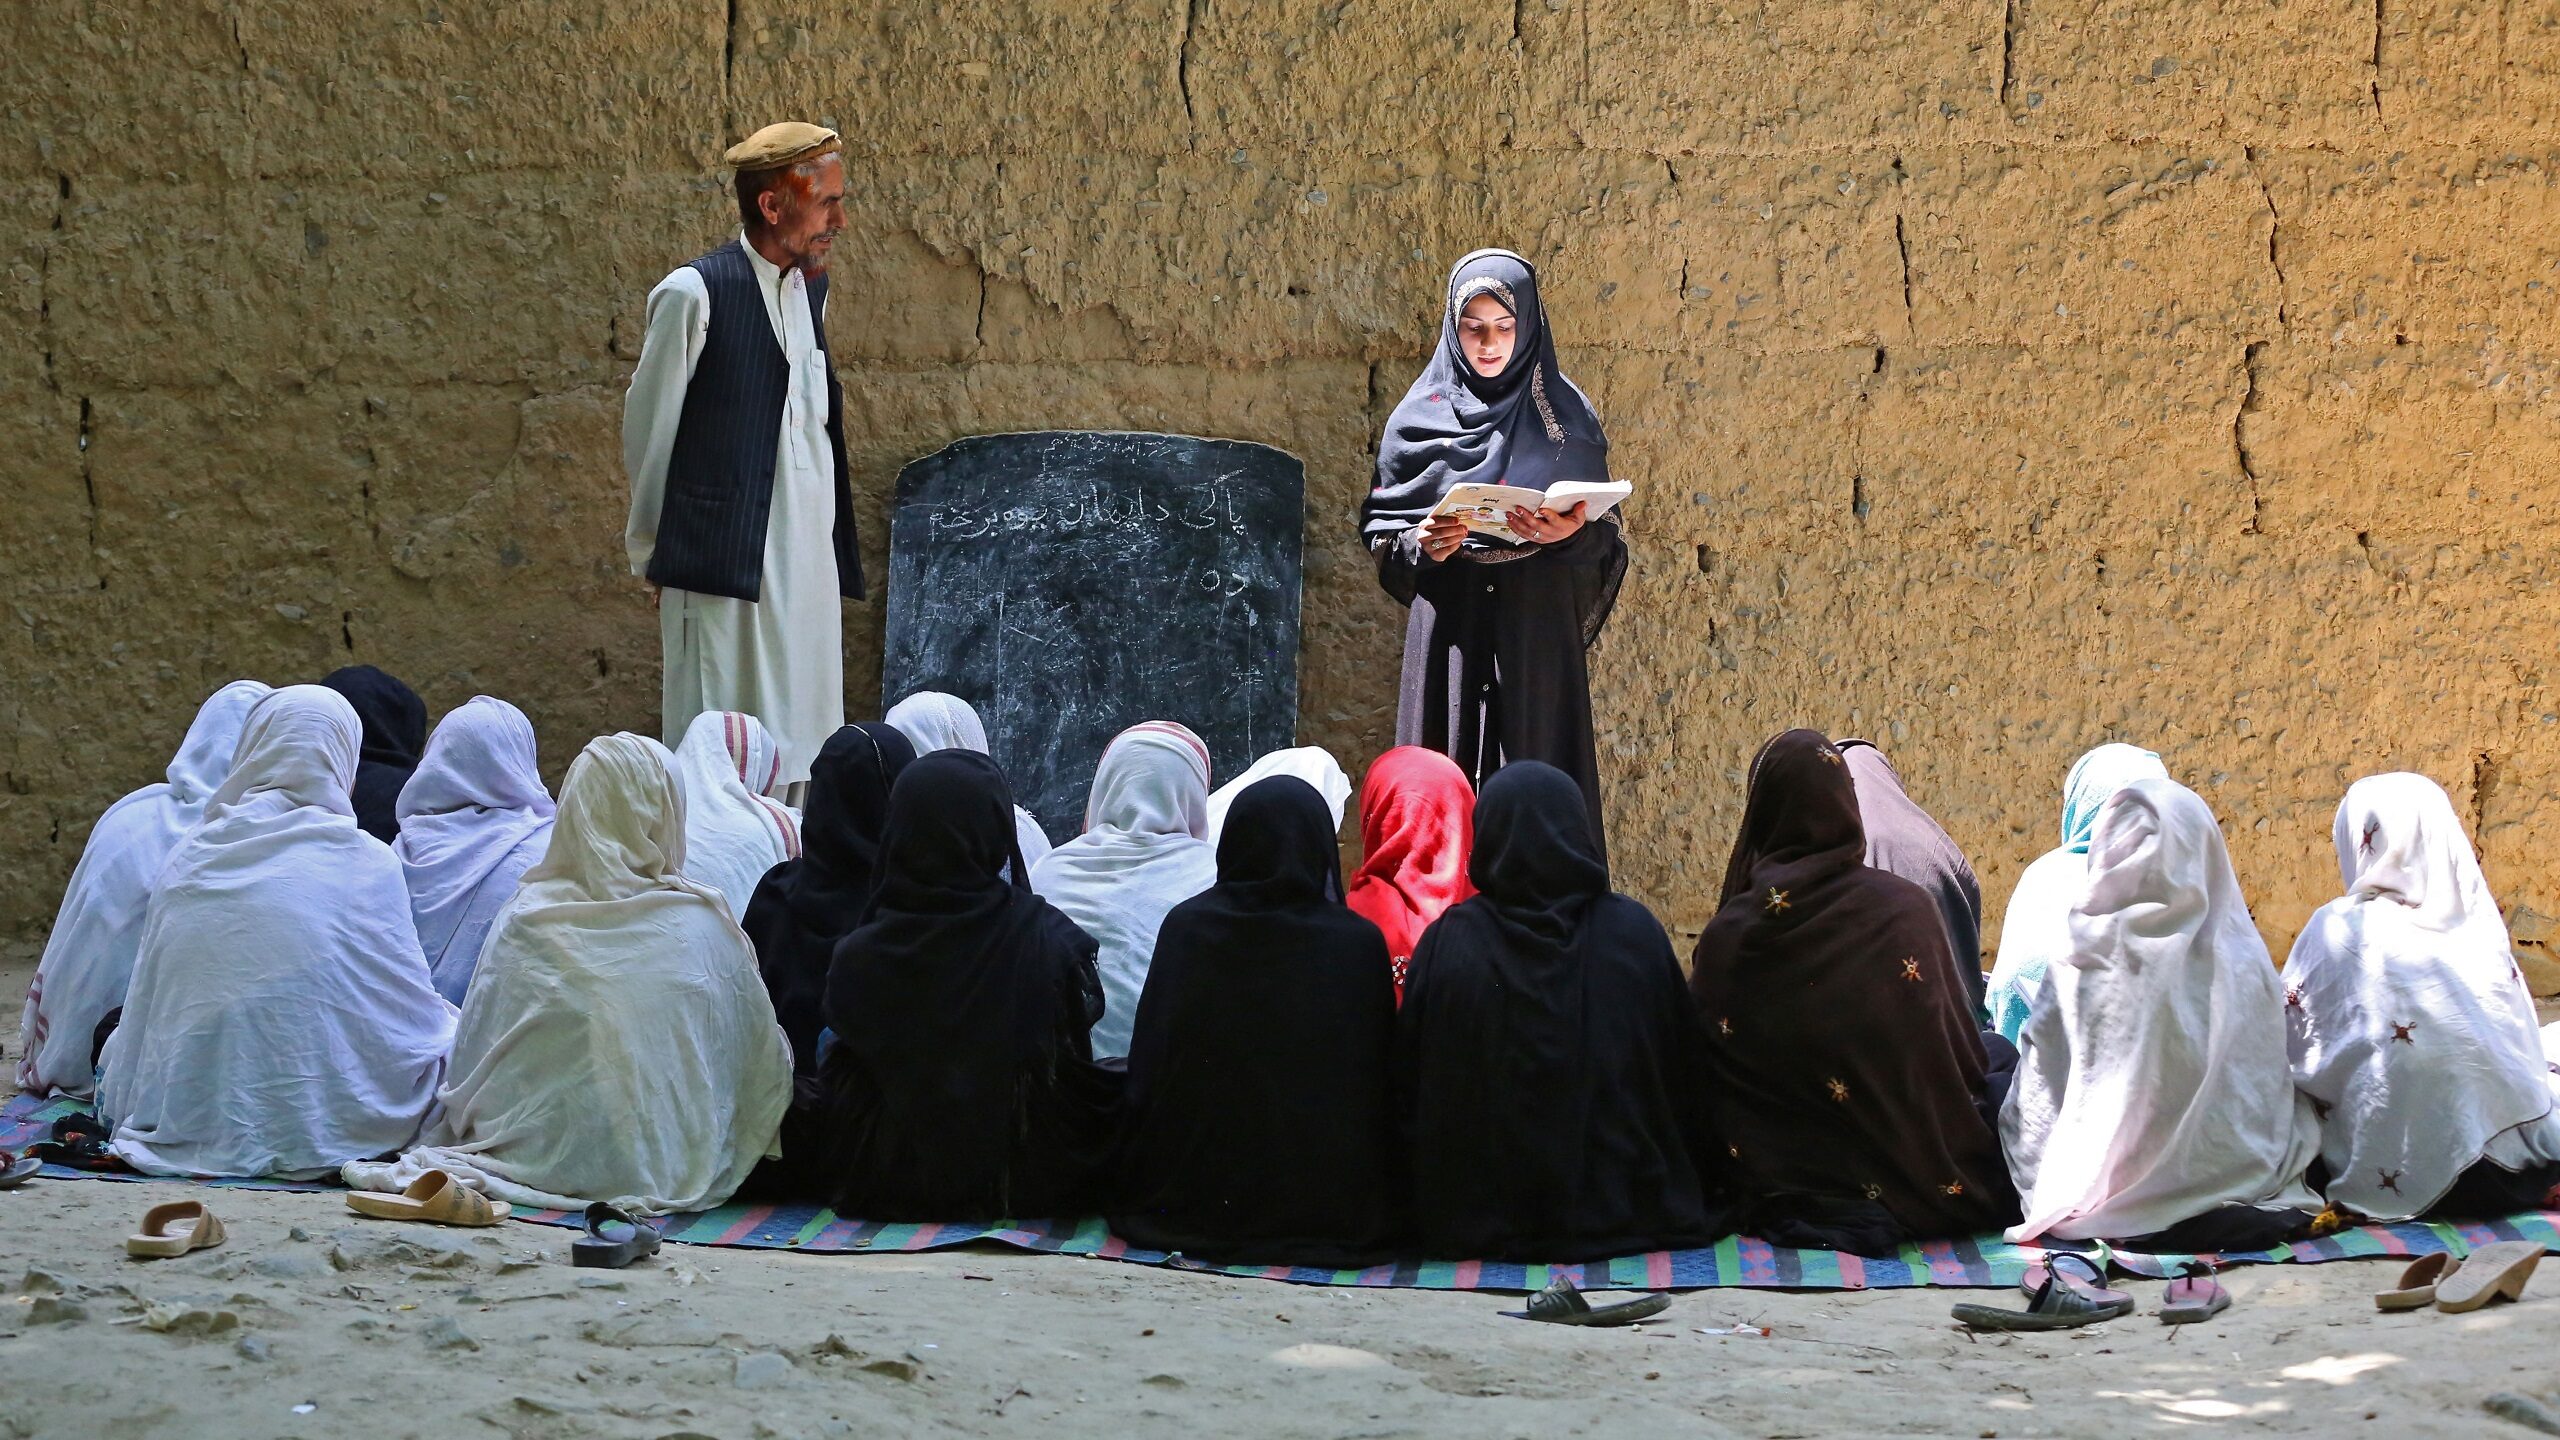 ‘Gender Apartheid’ Is Virtue Signaling: Legal Expert Criticizes UN’s Approach on Afghan Women’s Rights